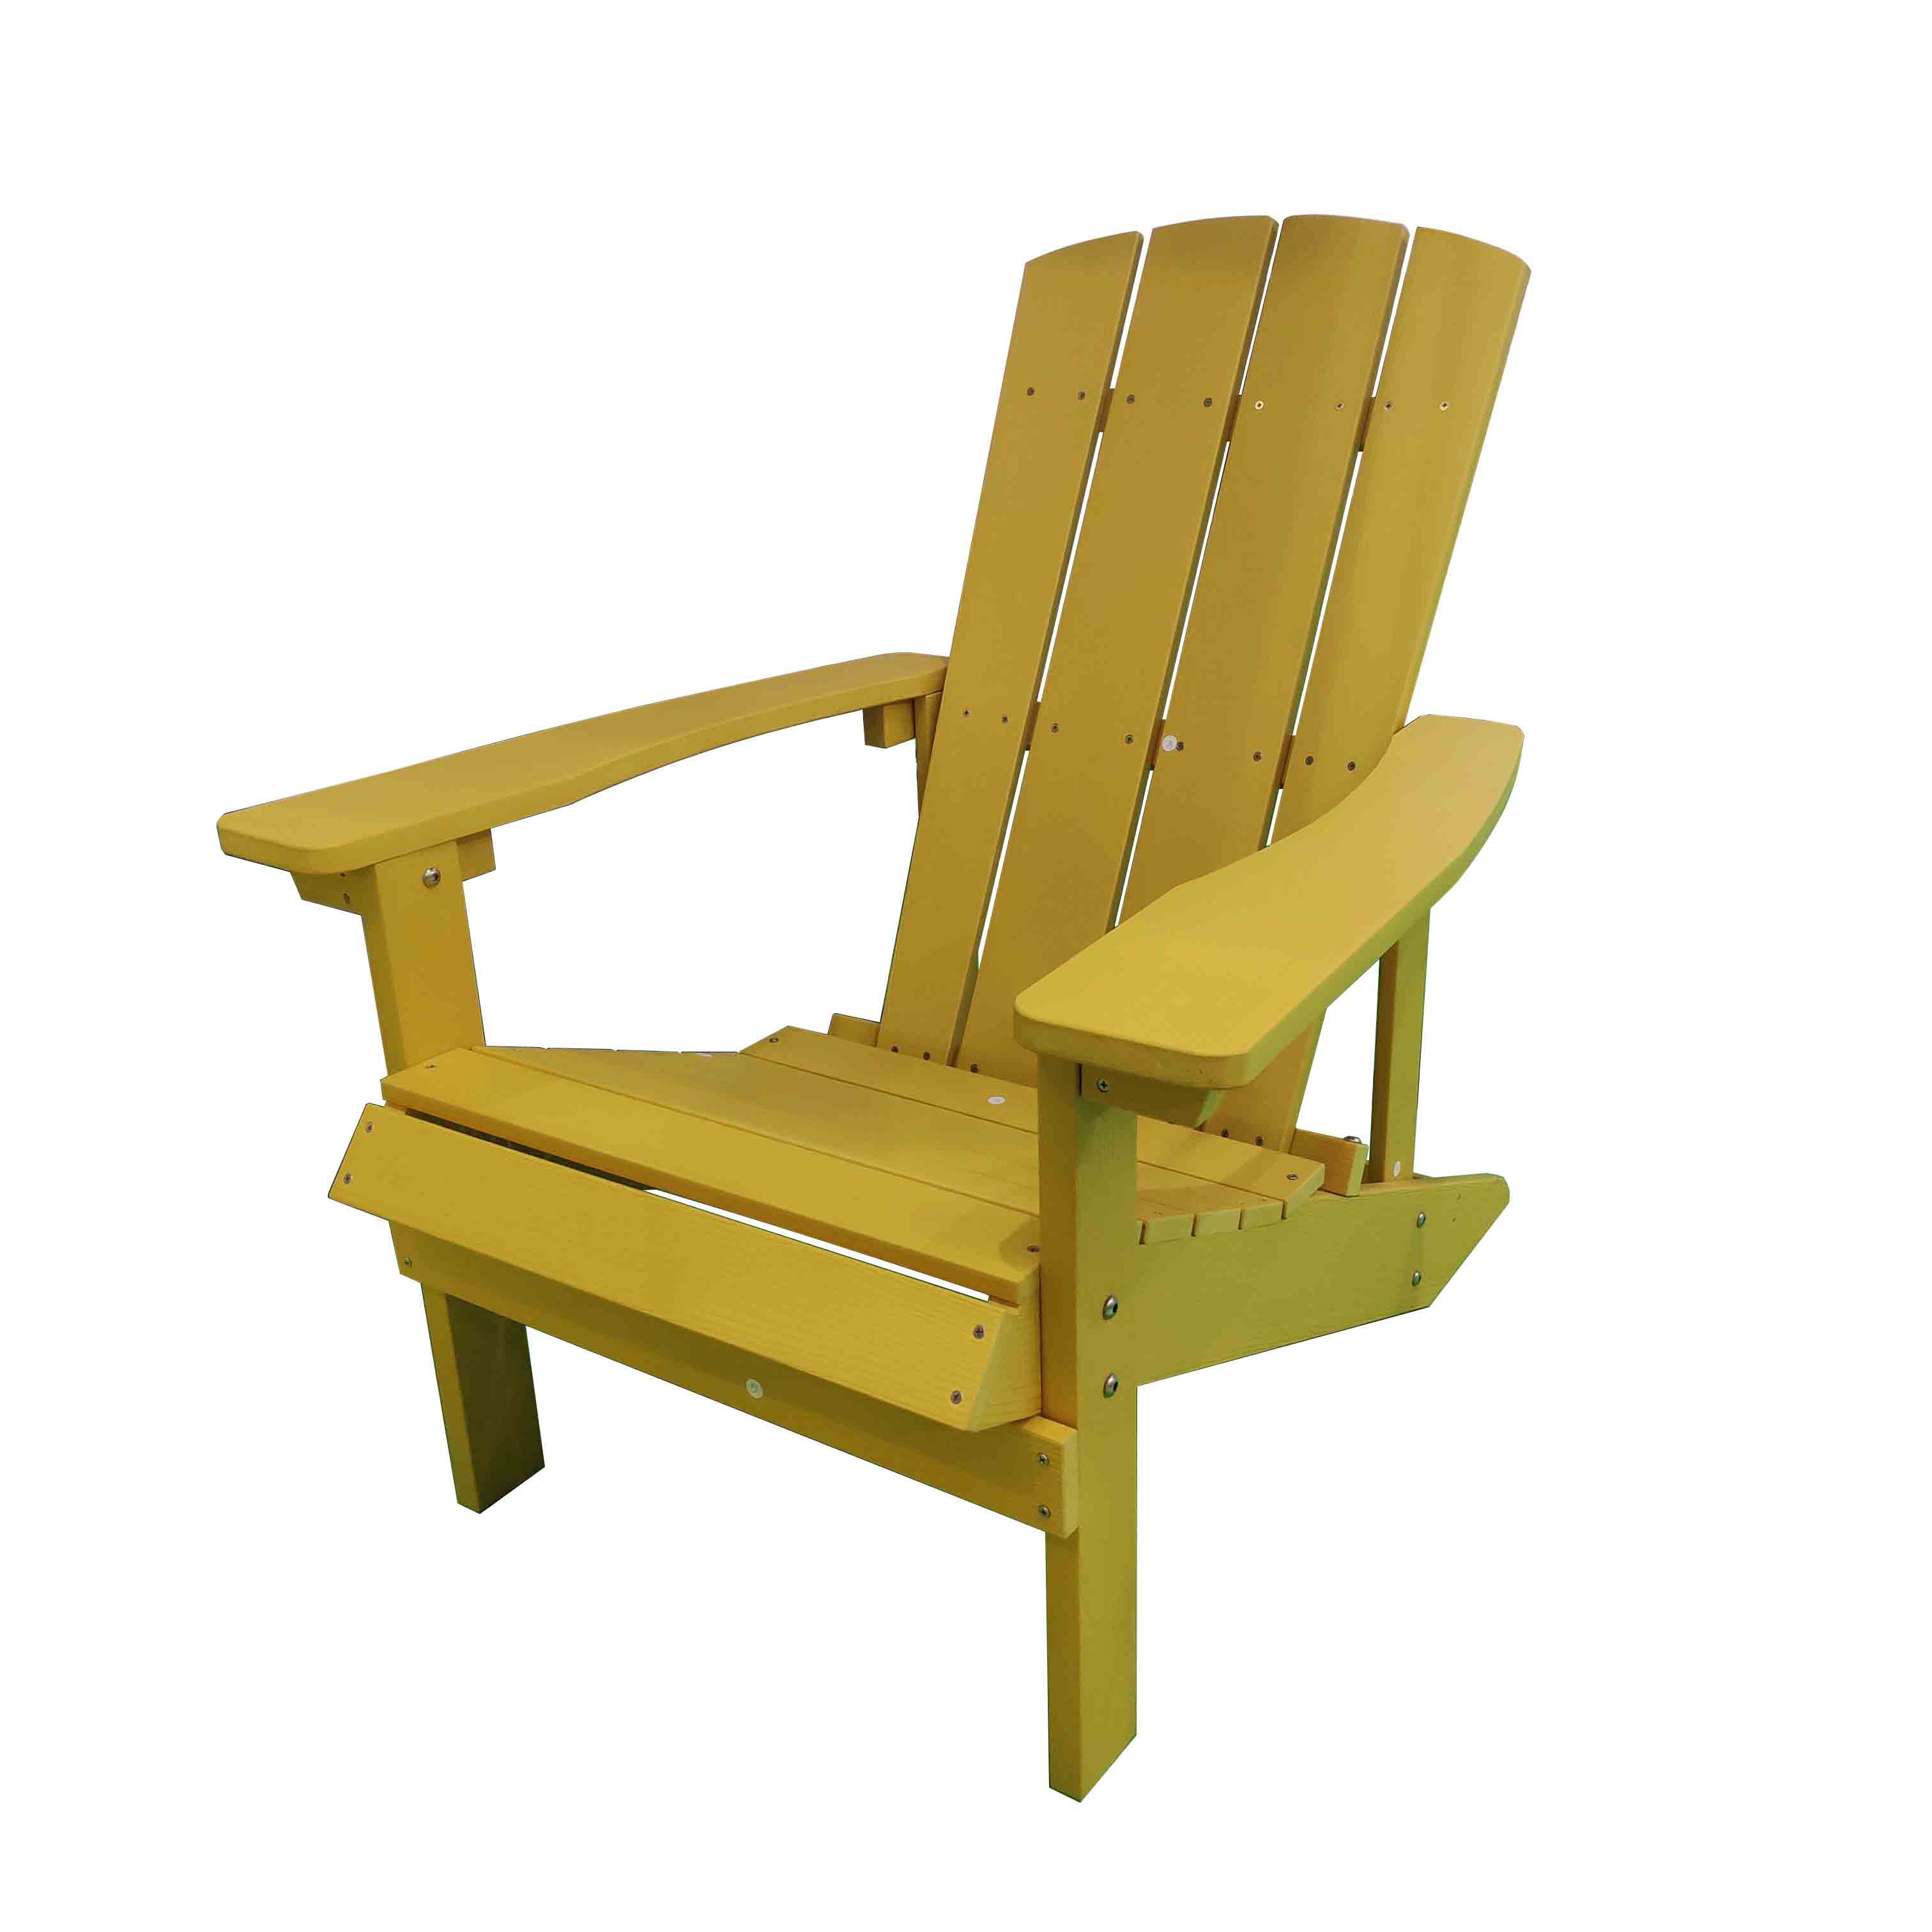 OEM High quality High-Back Stackable Armchair Company - JJ-C14501-YLW-GG PS wood Adirondack chair – Jin-jiang Industry